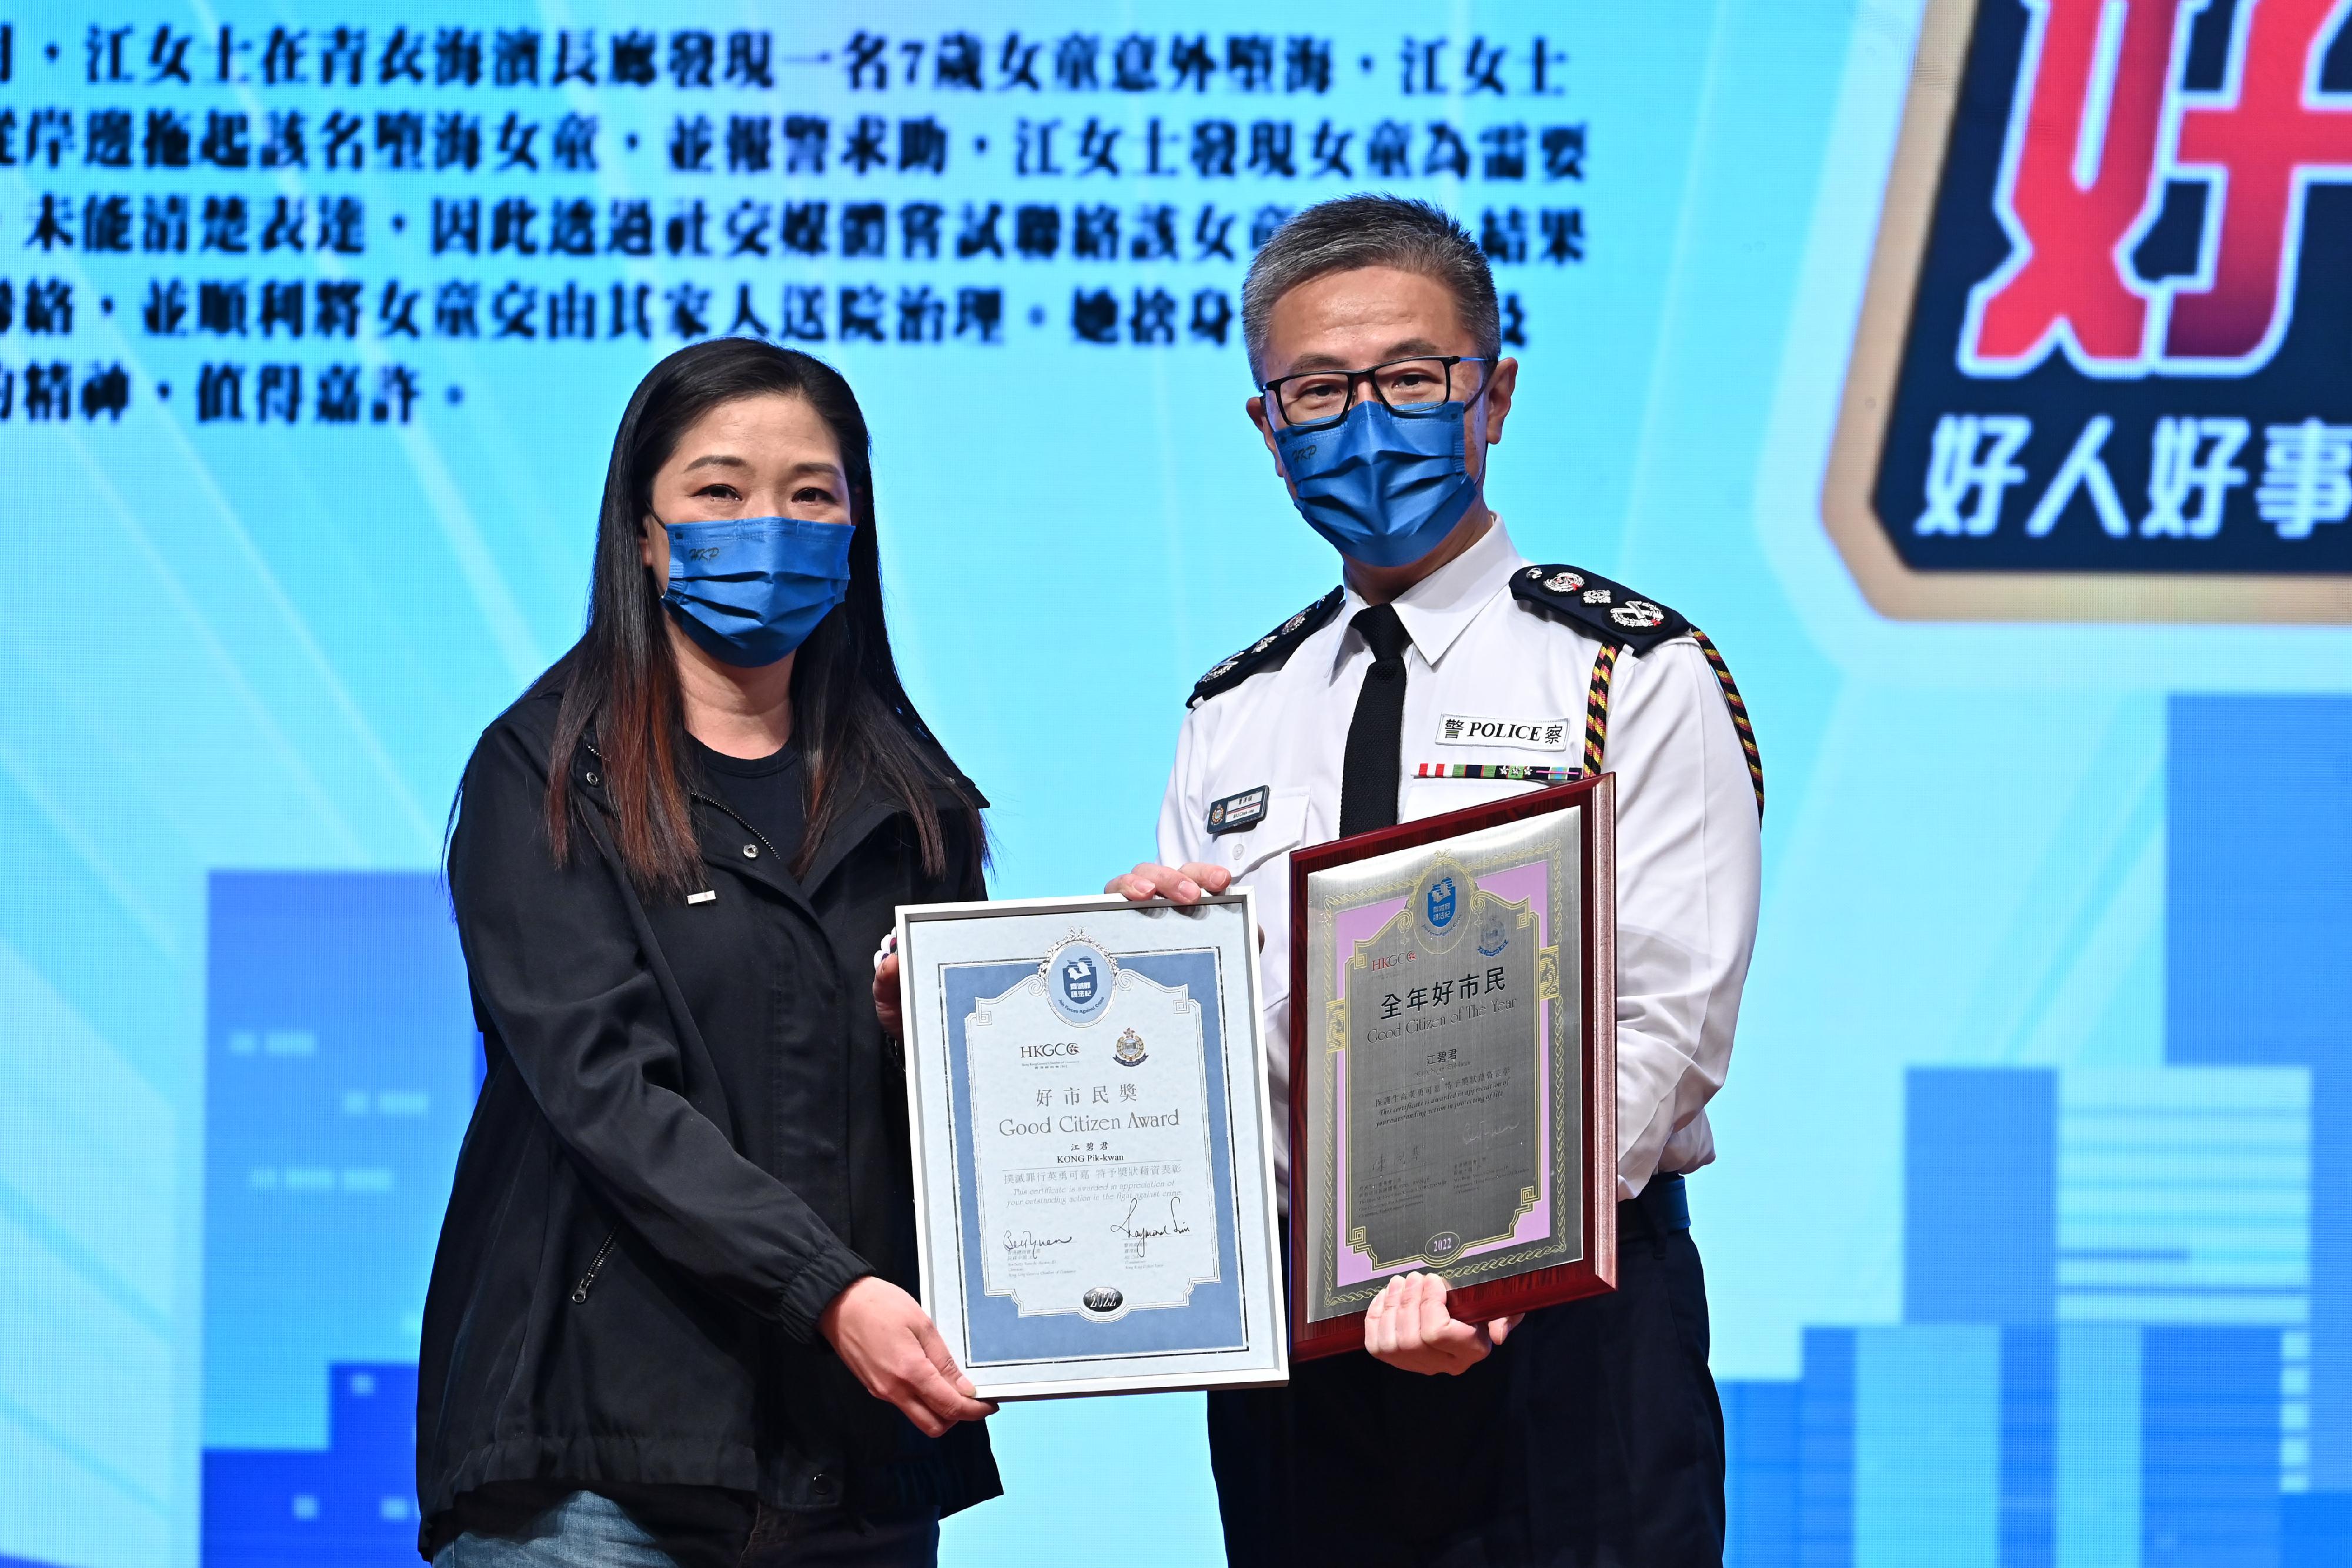 The Good Citizen Award 2022 cum 50th Anniversary Presentation Ceremony was held today (February 26). Picture shows the Commissioner of Police, Mr Siu Chak-yee (right), presenting the Good Citizen of the Year Award to Ms Debby Kong.